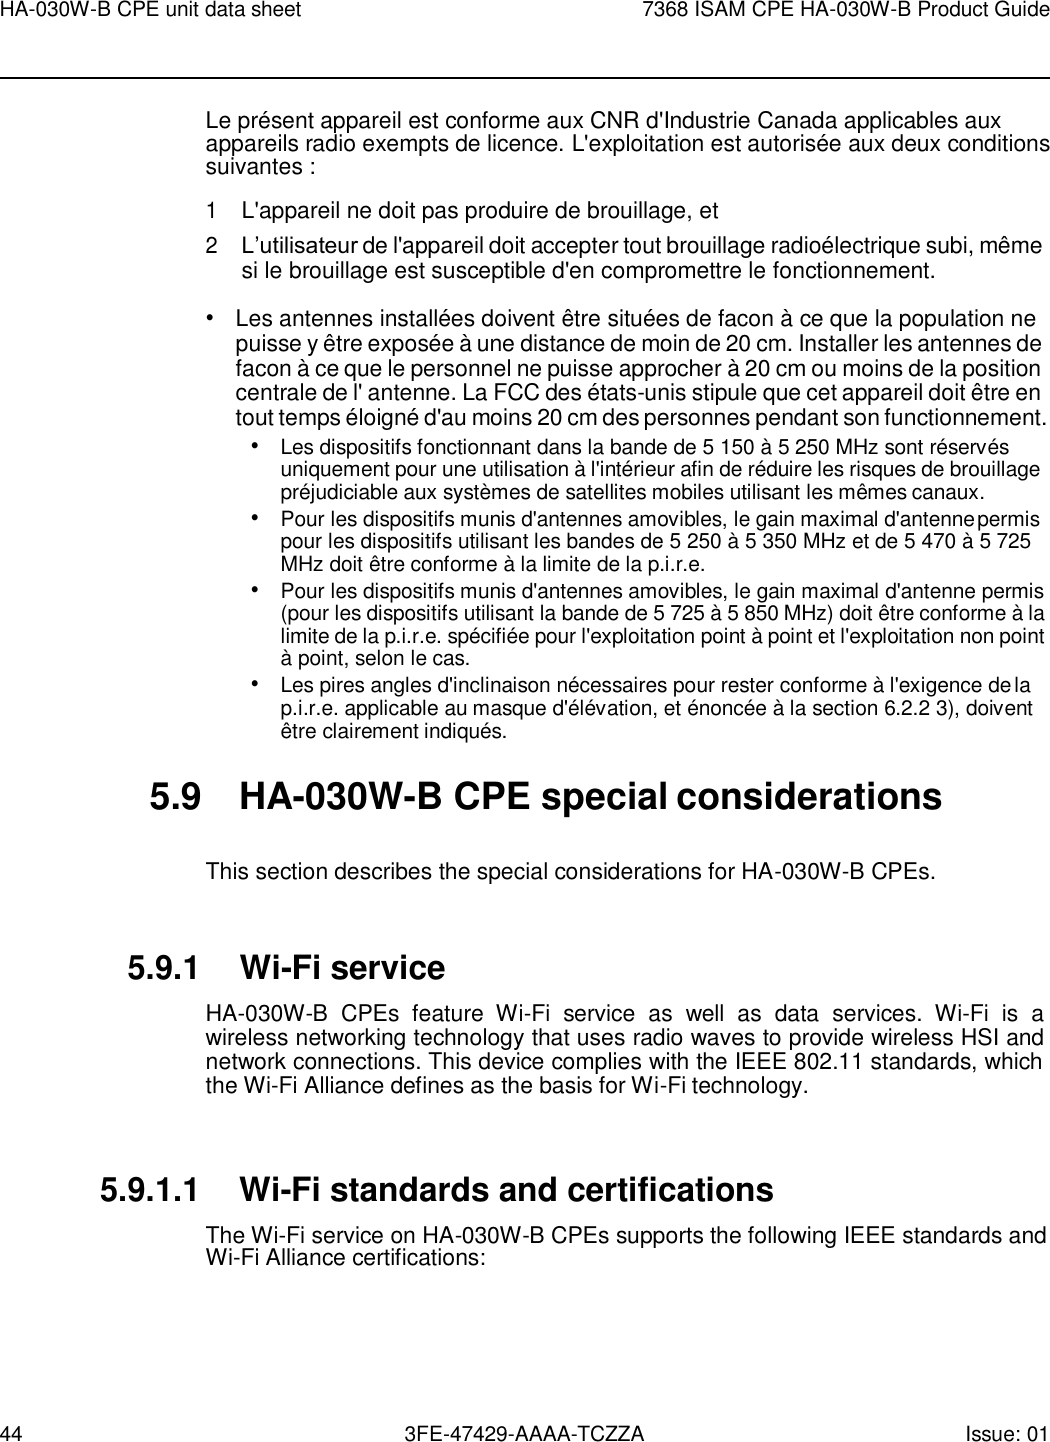 Page 44 of Nokia Bell HA030WB 7368 Intelligent Services Access Manager CPE User Manual 7368 ISAM CPE HA 020W A Product Guide